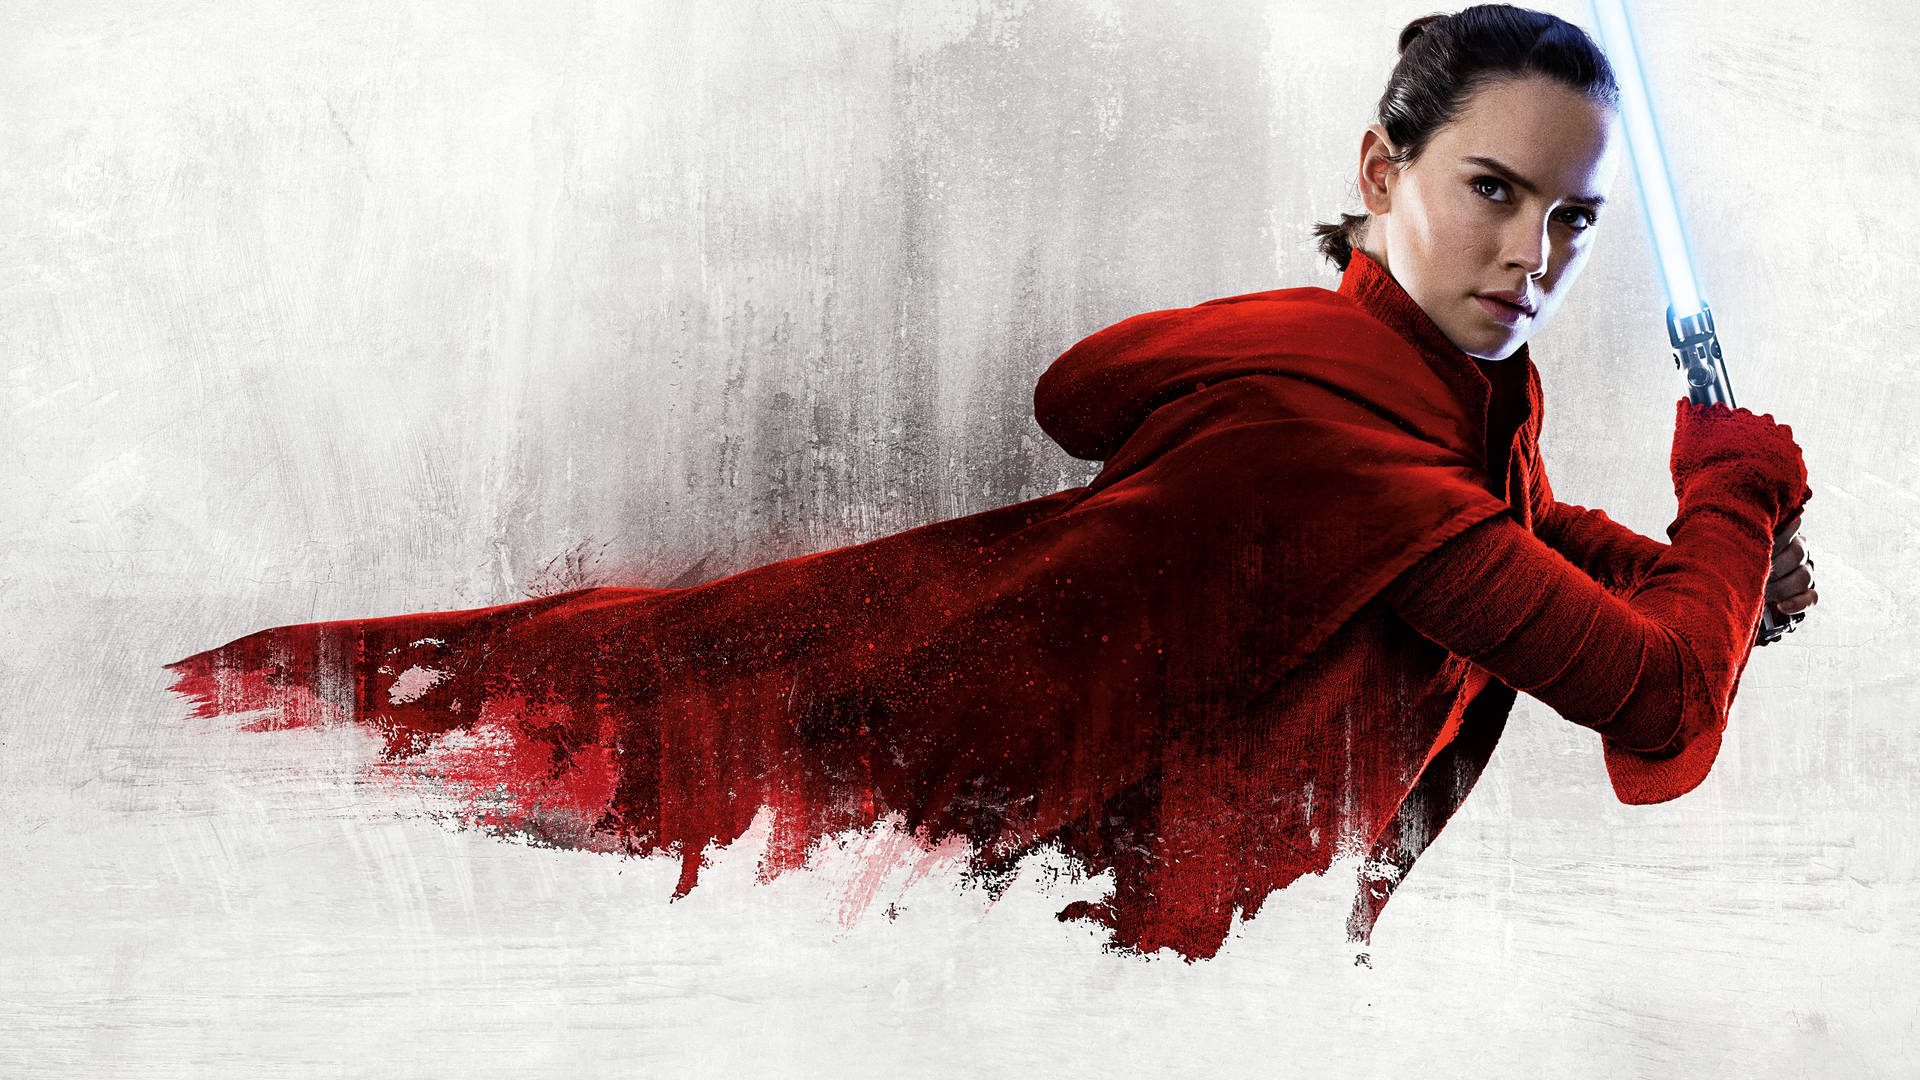 The Force Awakens as Rey charges her destiny in the Star Wars movie. Wallpaper